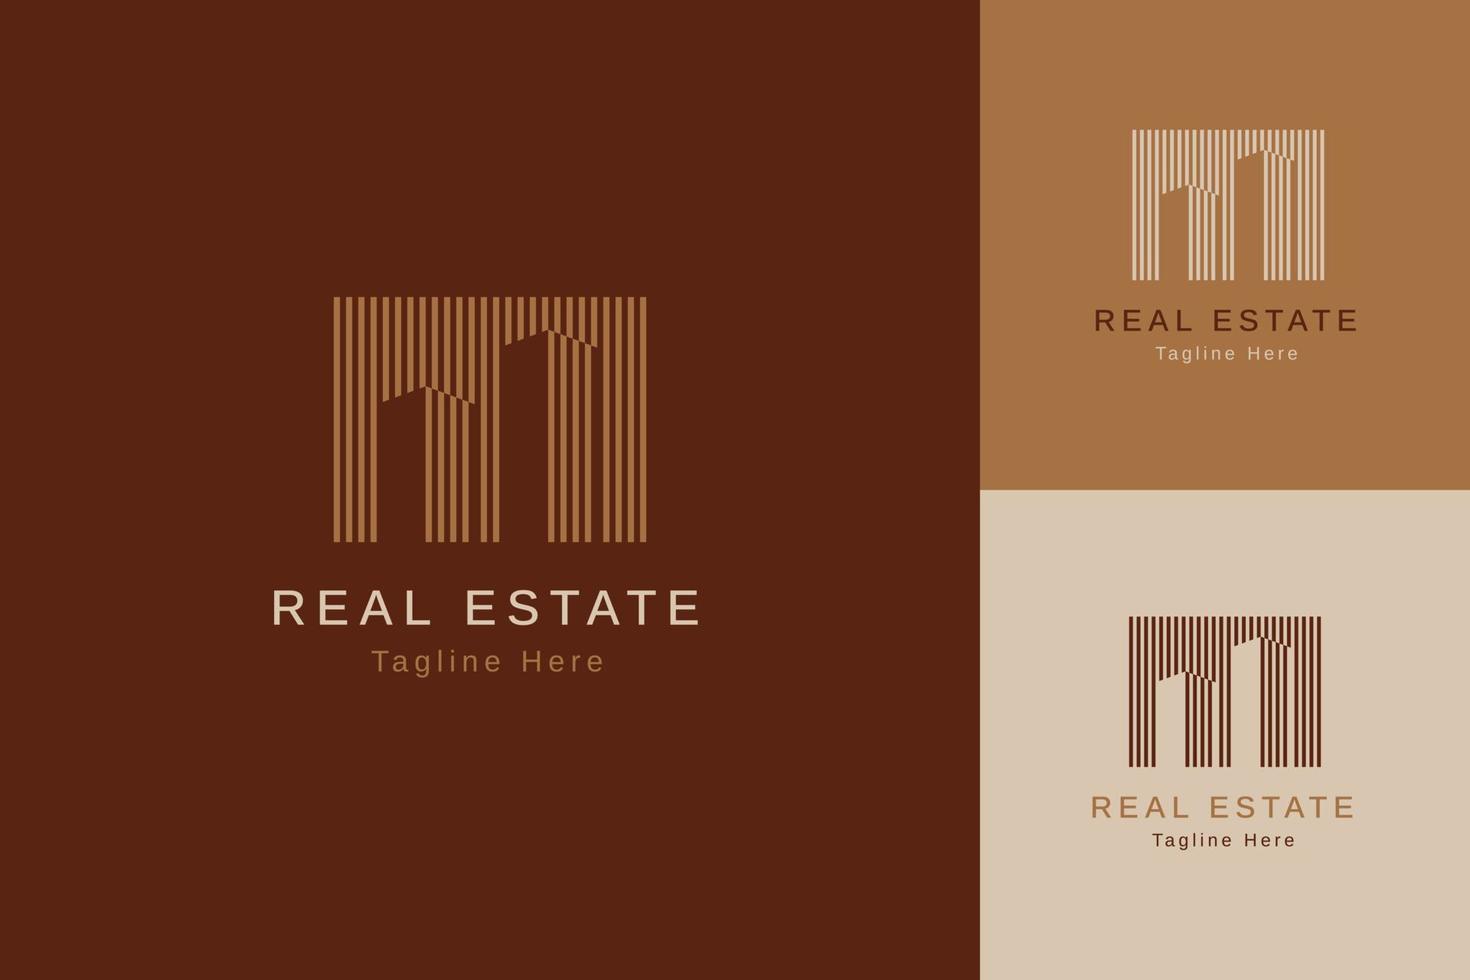 Set of real estate property logo vector design template with different color style